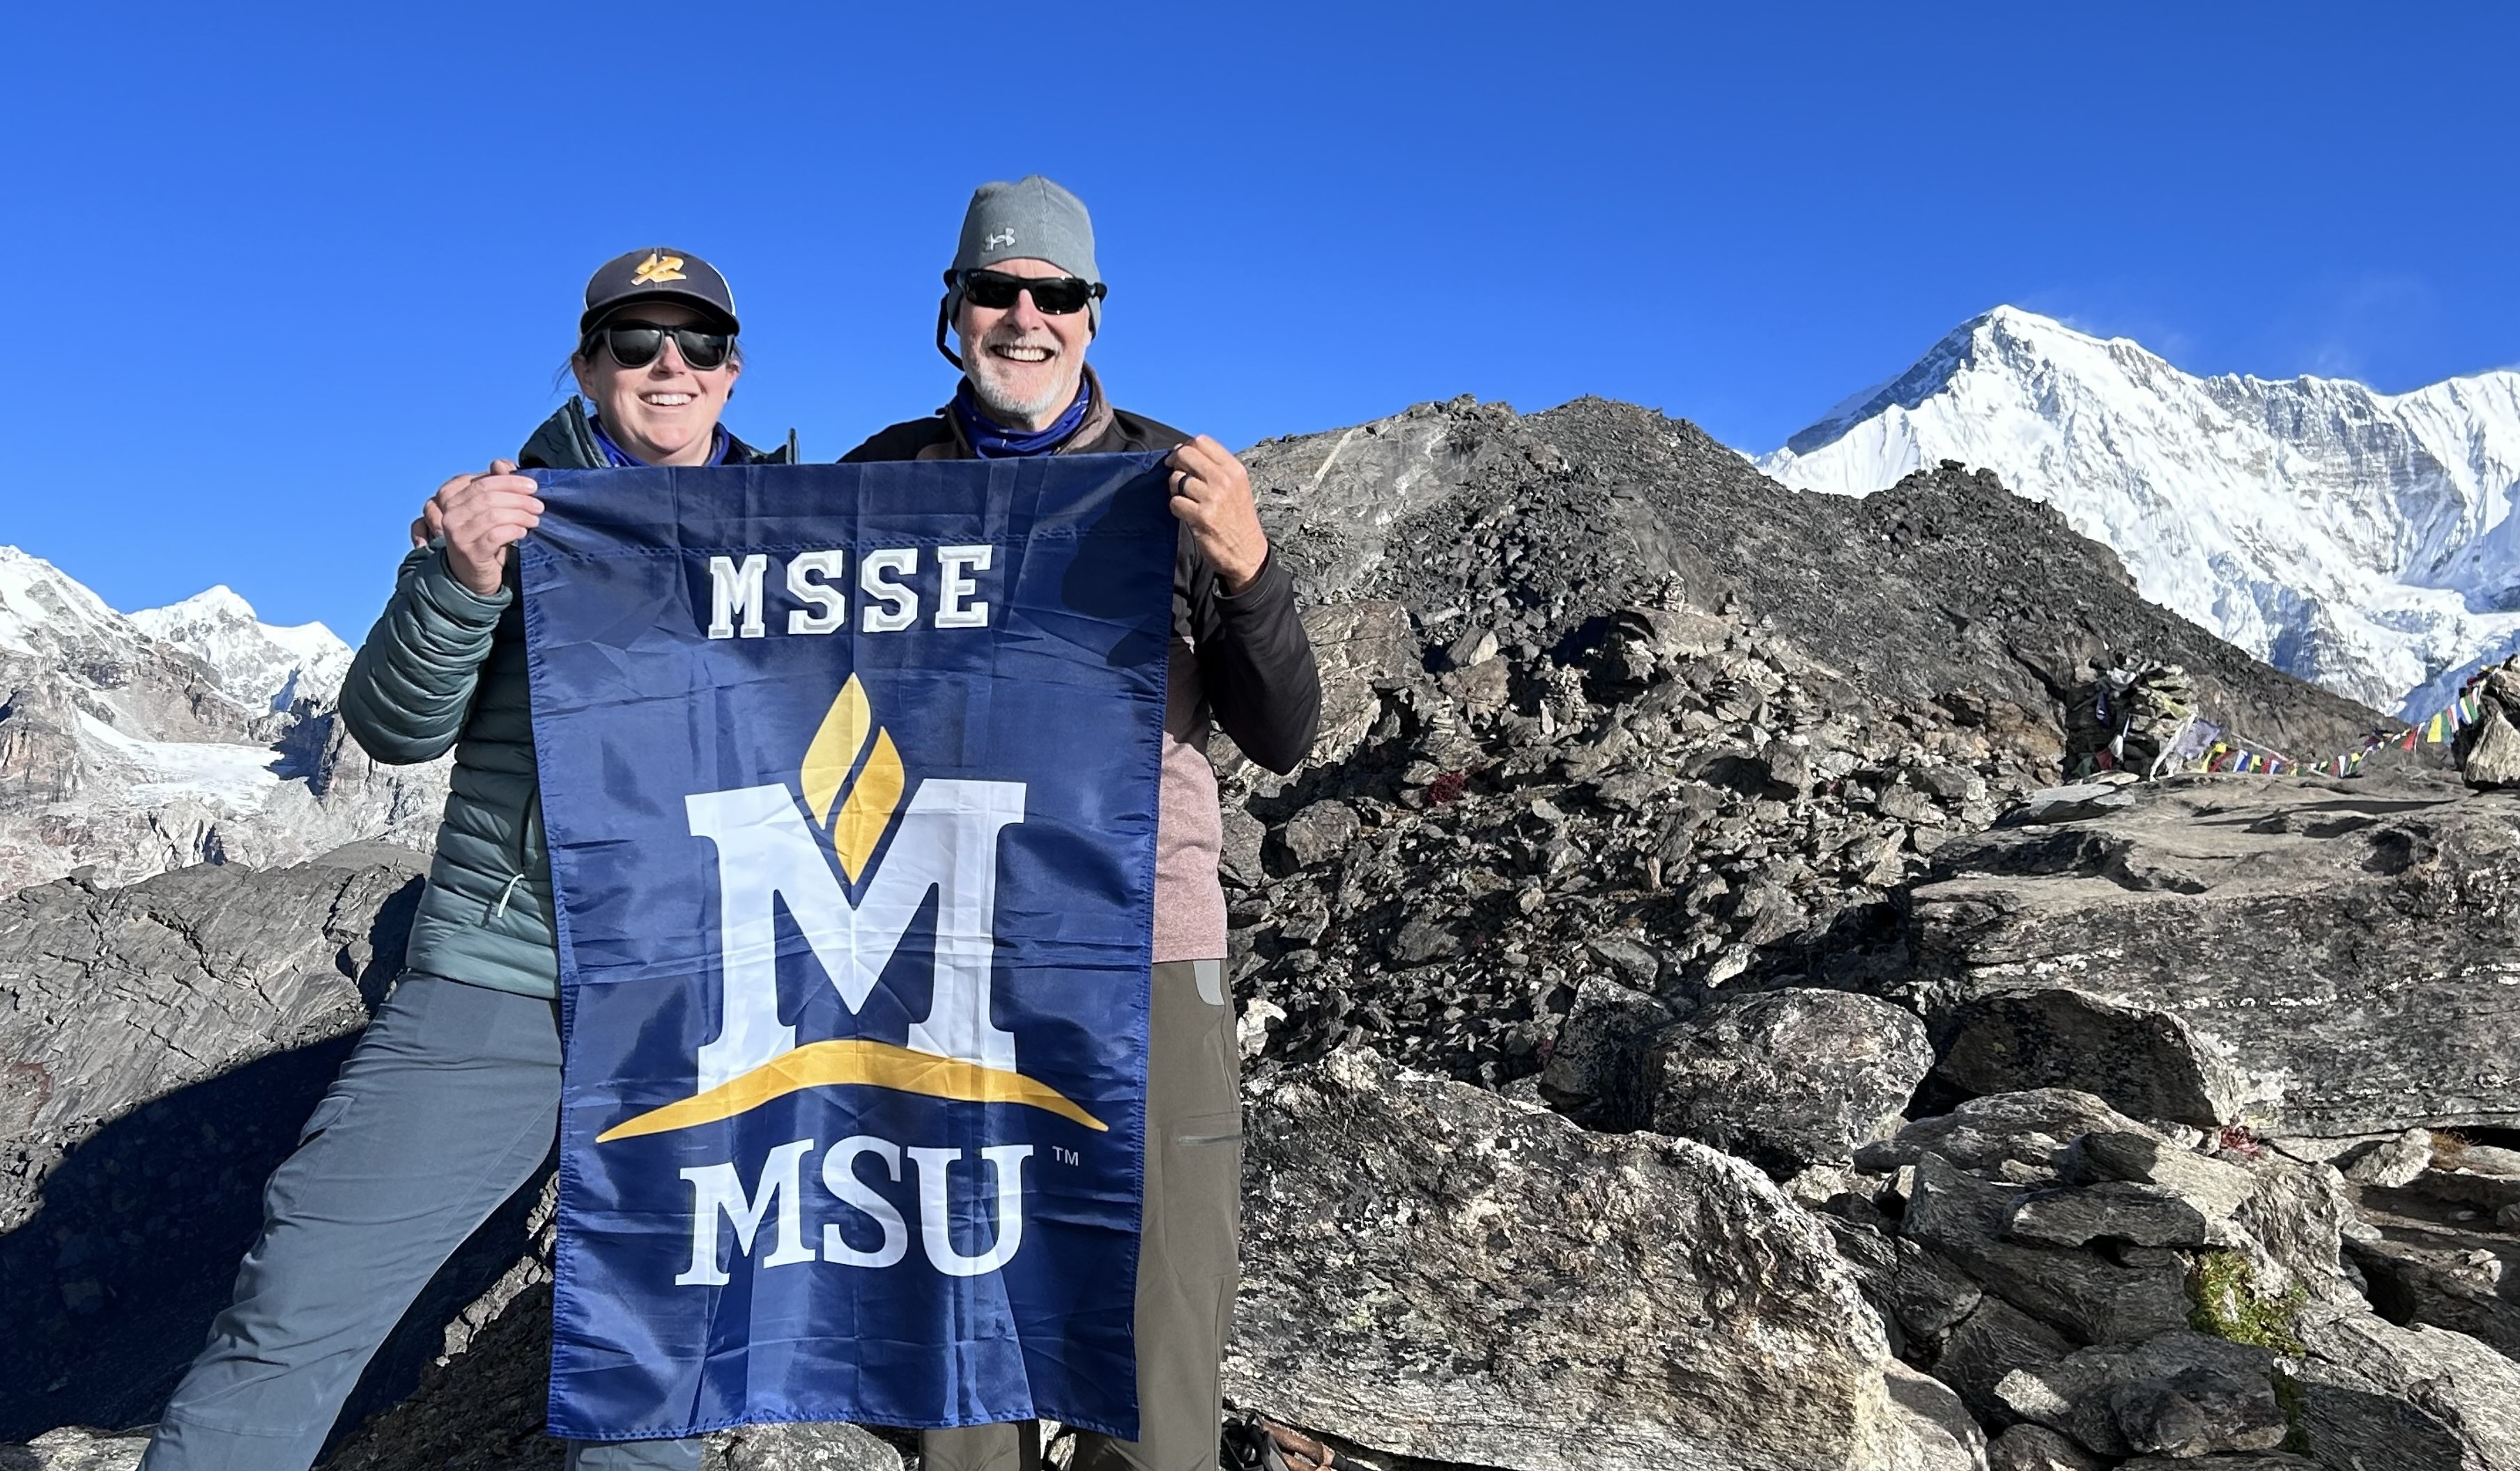 John Graves in Nepal with a student on a mountain, as part of MSSE program.